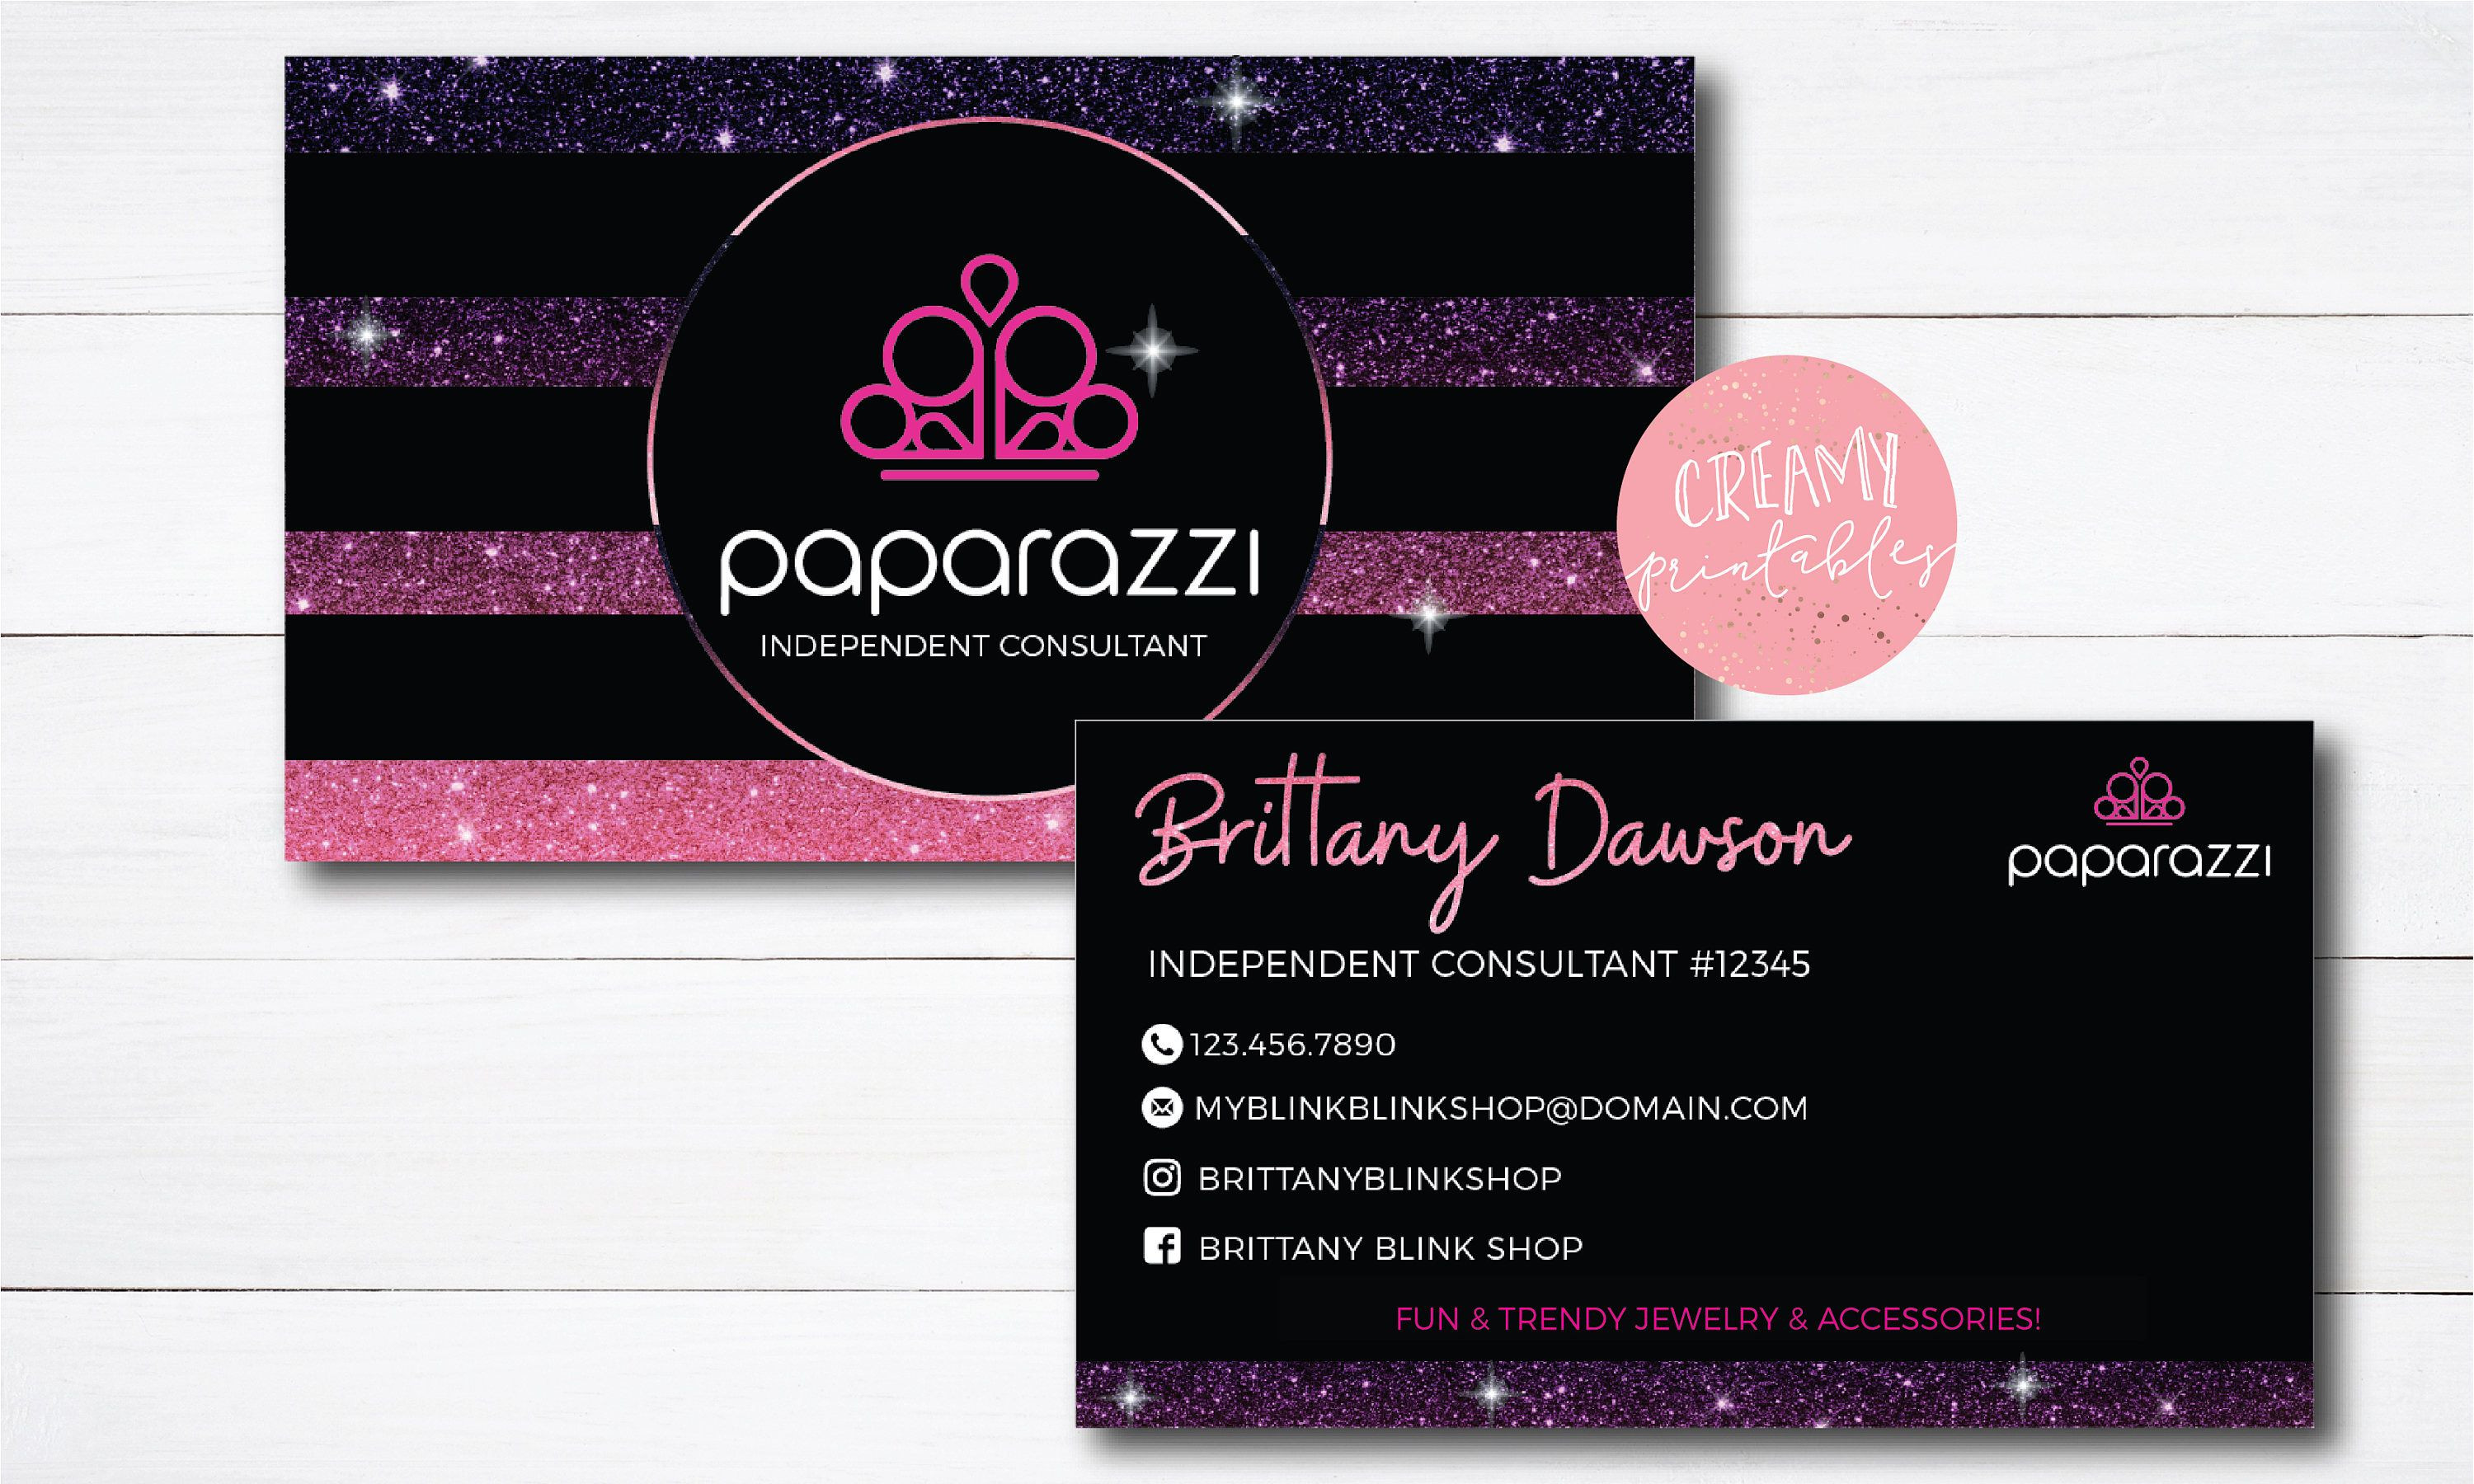 Printable Paparazzi Business Card Paparazzi Jewelry Of Business Cards Free Design Templates